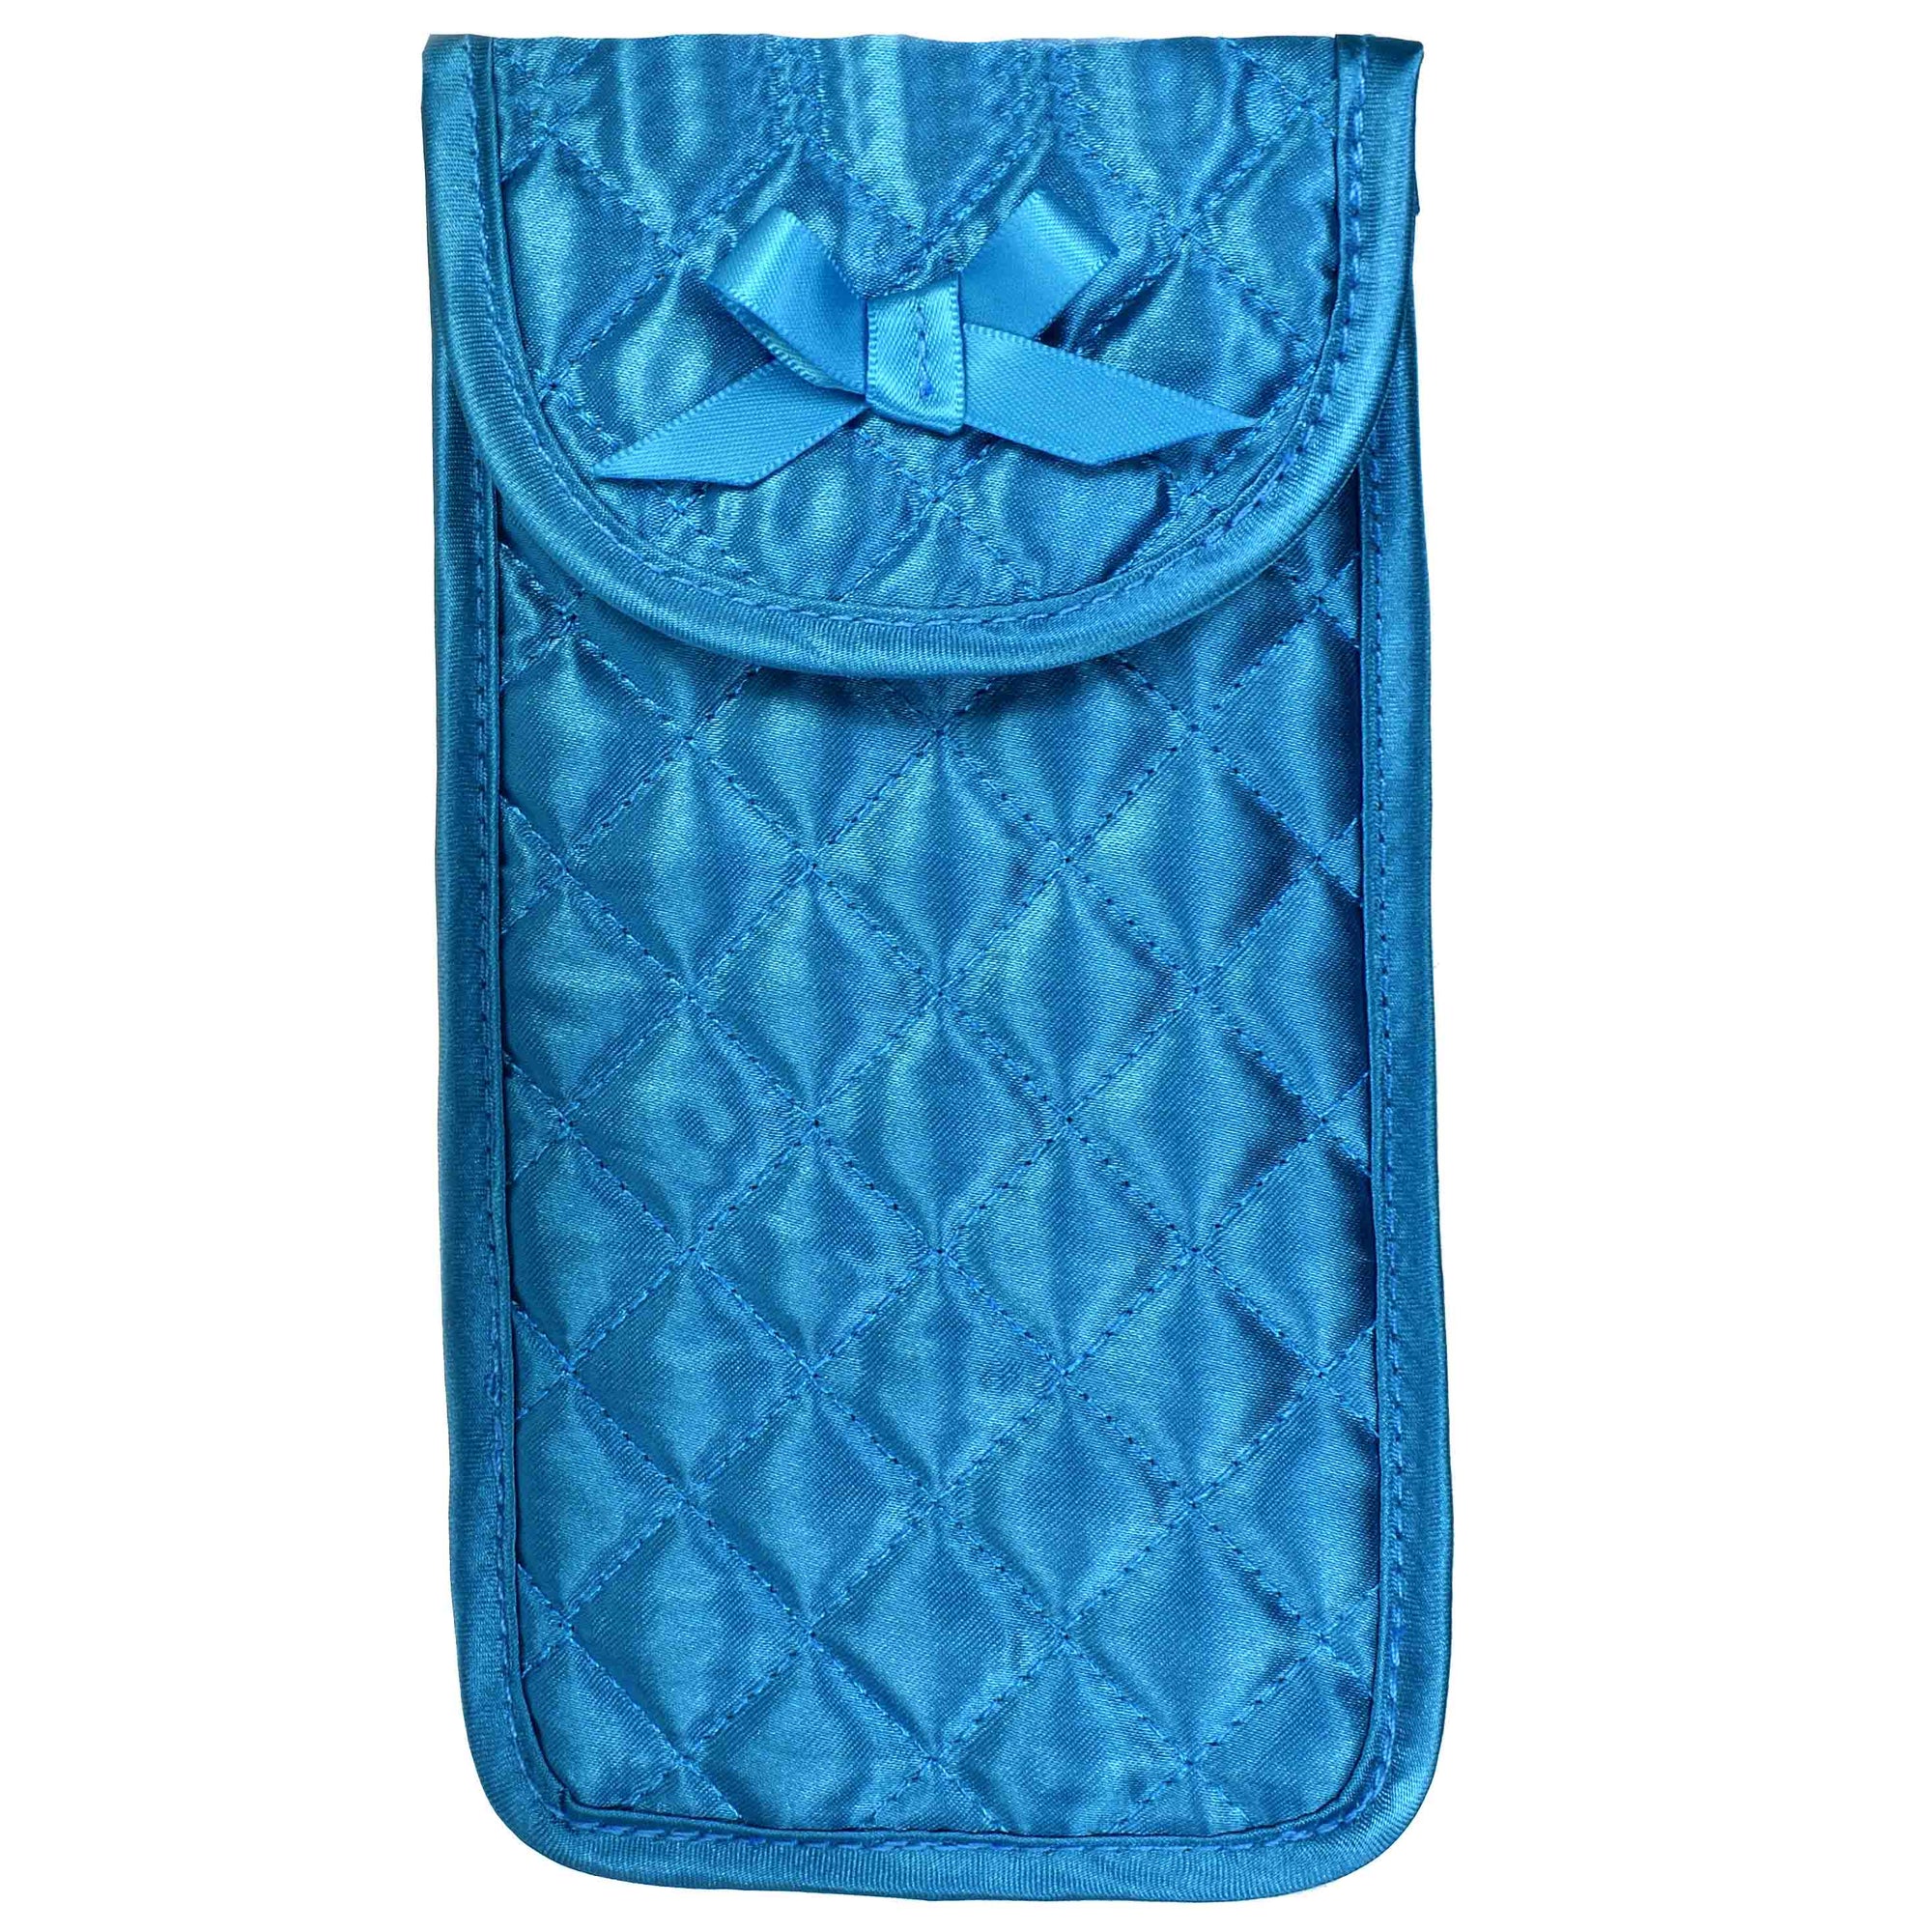 Quilted Satin Soft Eyeglass Pouch with Velcro Flap Closure in Teal, Front View